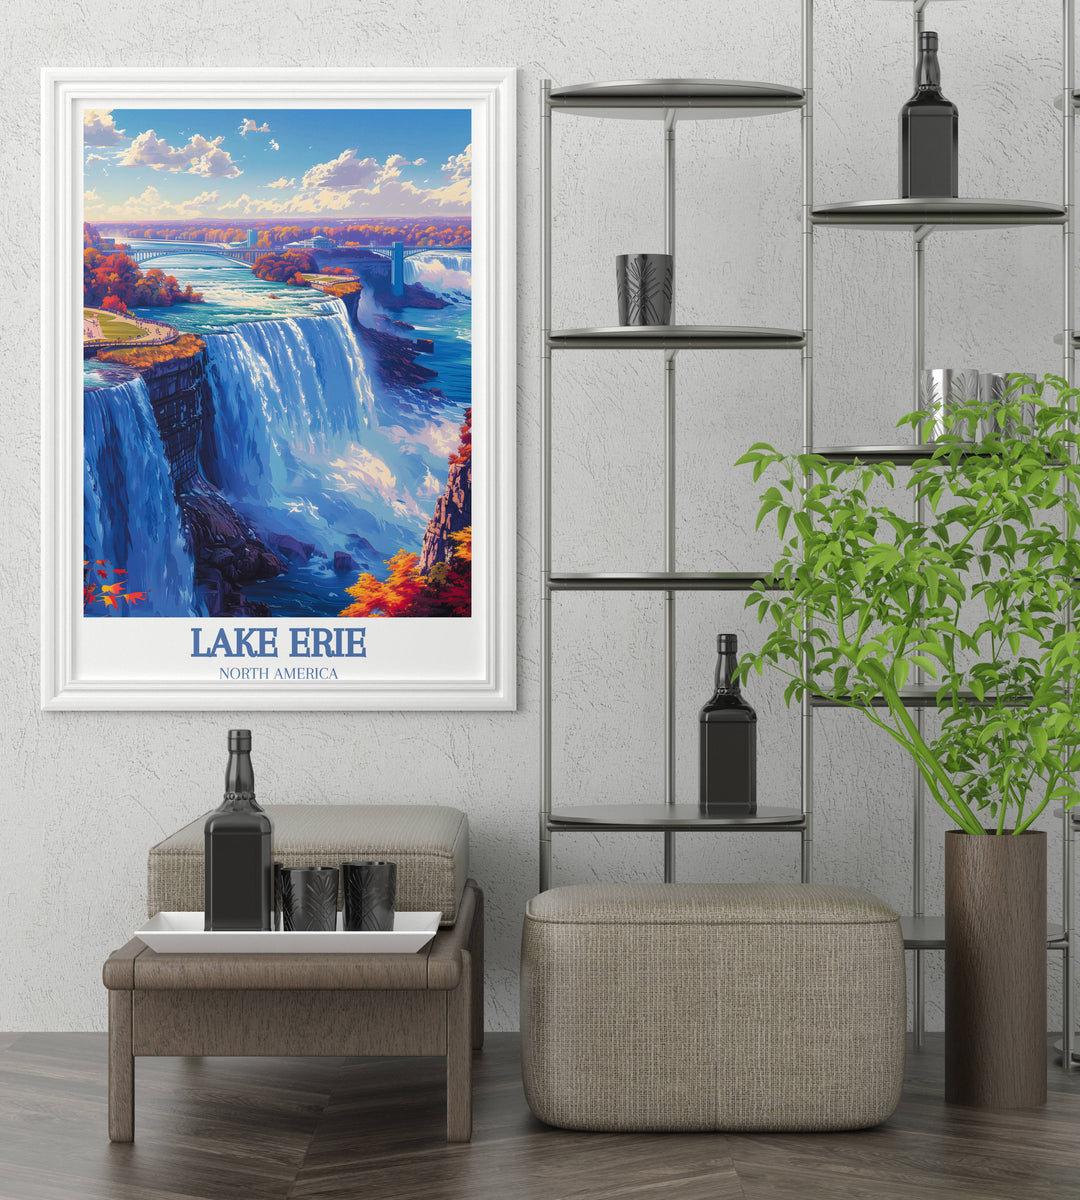 Artistic representation of Lake Erie during a vibrant sunset, great for adding color and life to any room.